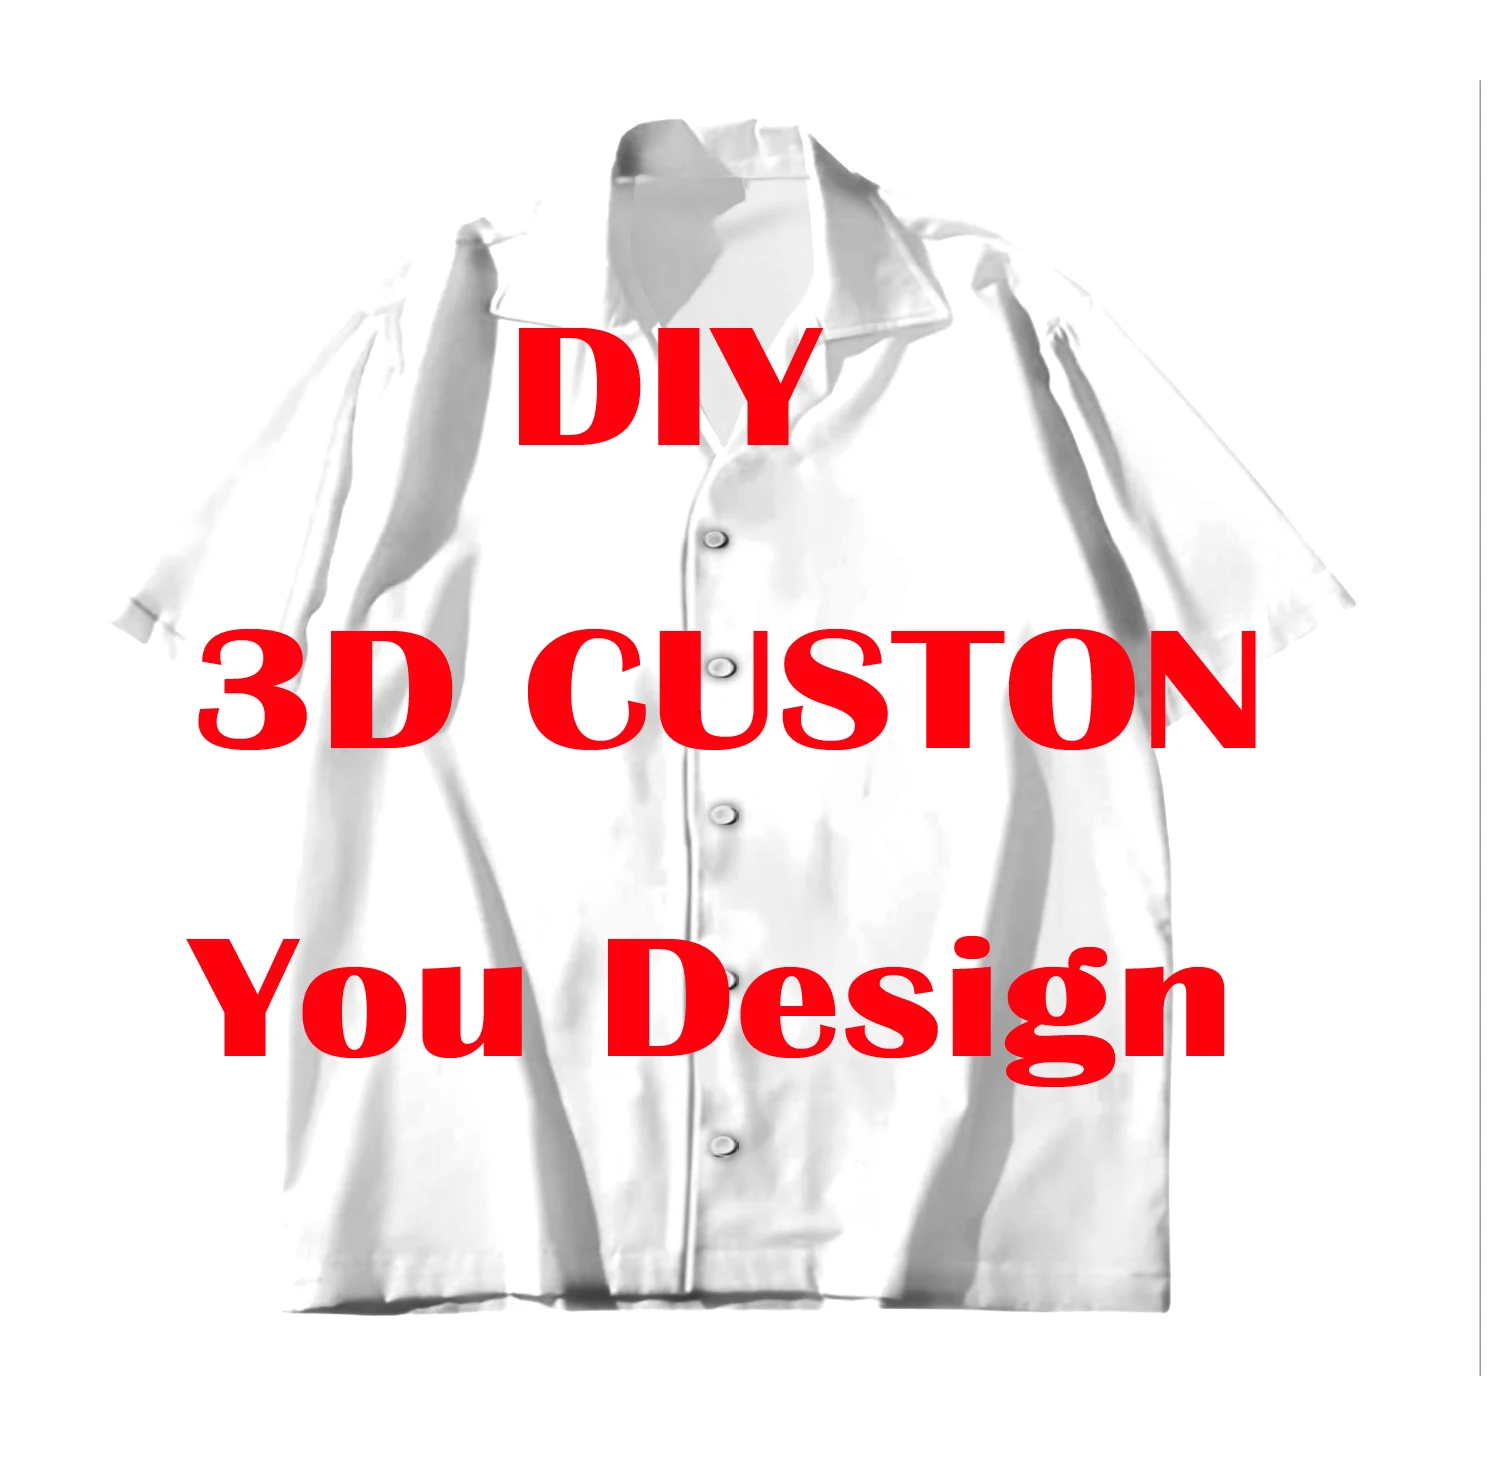 MCDV DIY Personalized Design pattern 3D All Over Printed Men's For Women Spread-Collar Hawaii Shirt Casual short sleeve shirt peace love camper personalized rompers for women 3d all over printed rompers summer women s bohemia clothes